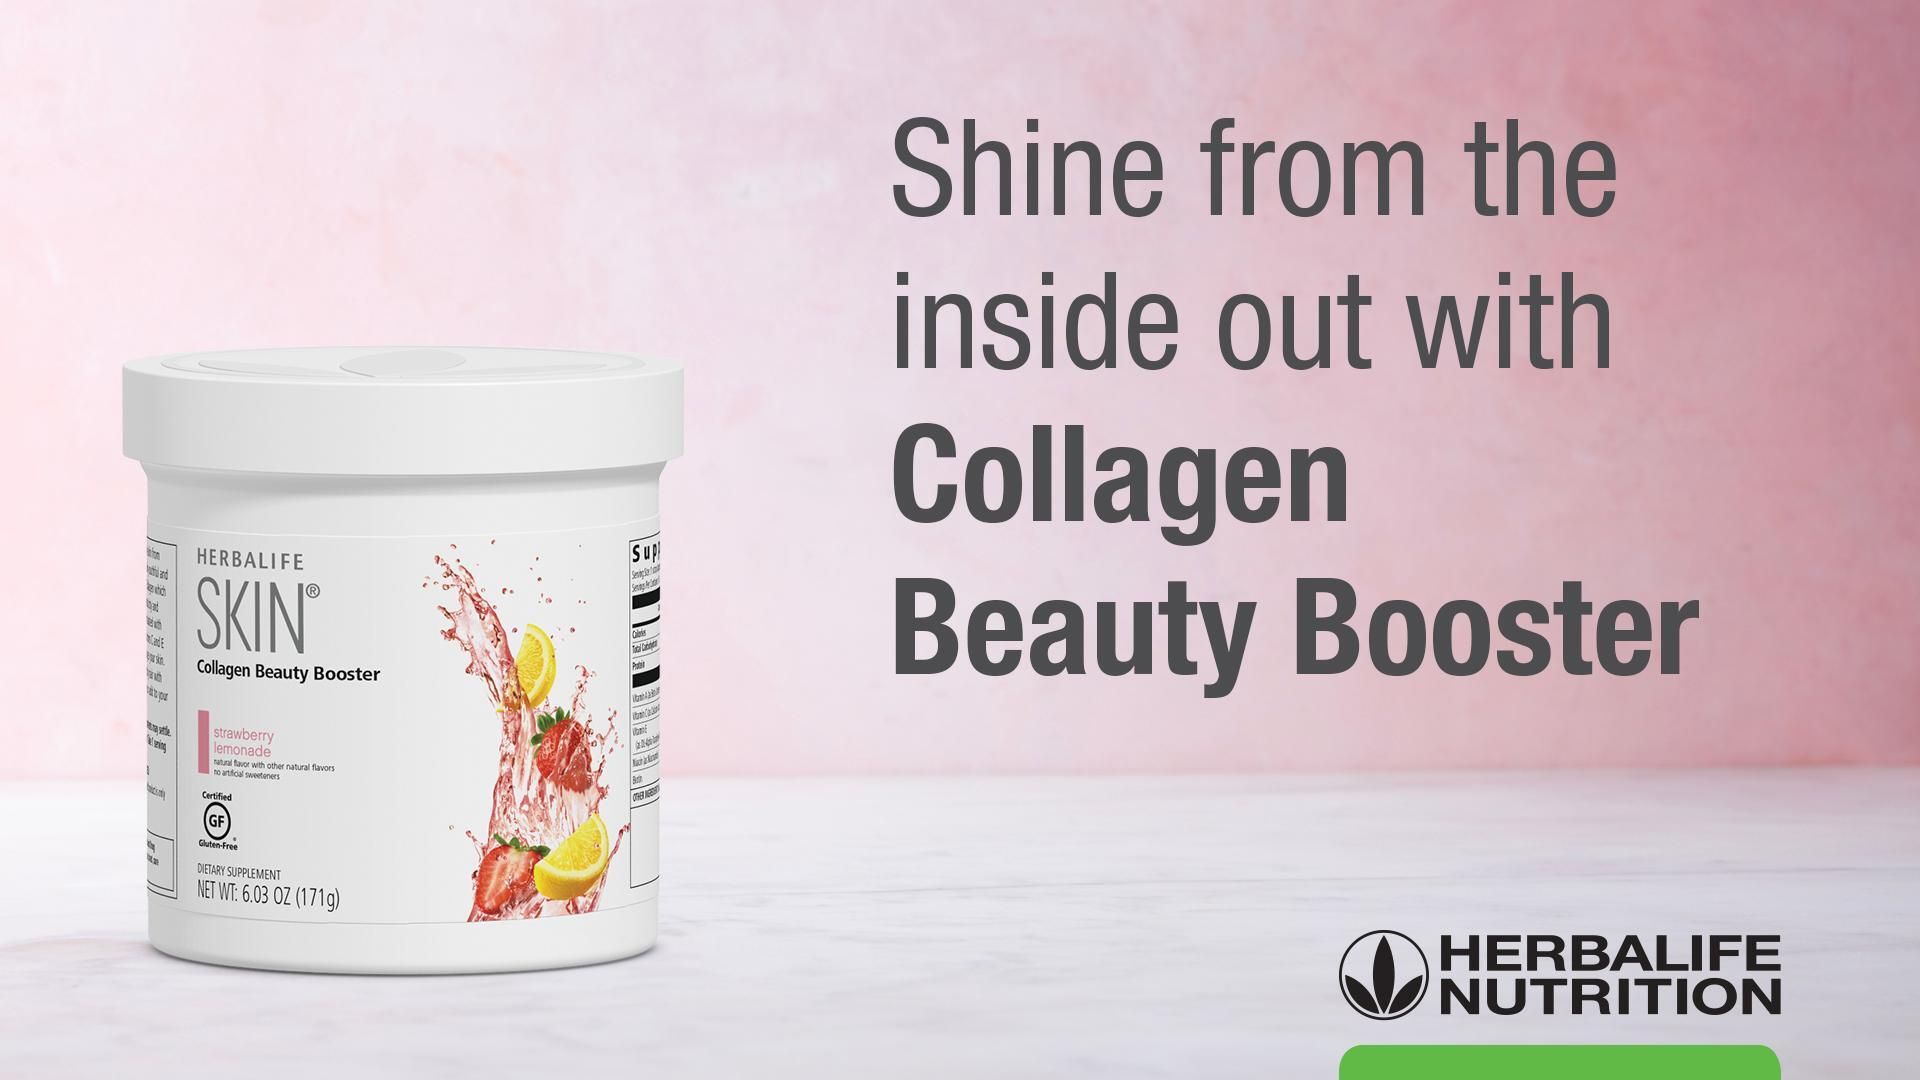 Collagen Beauty Booster: Know the Products